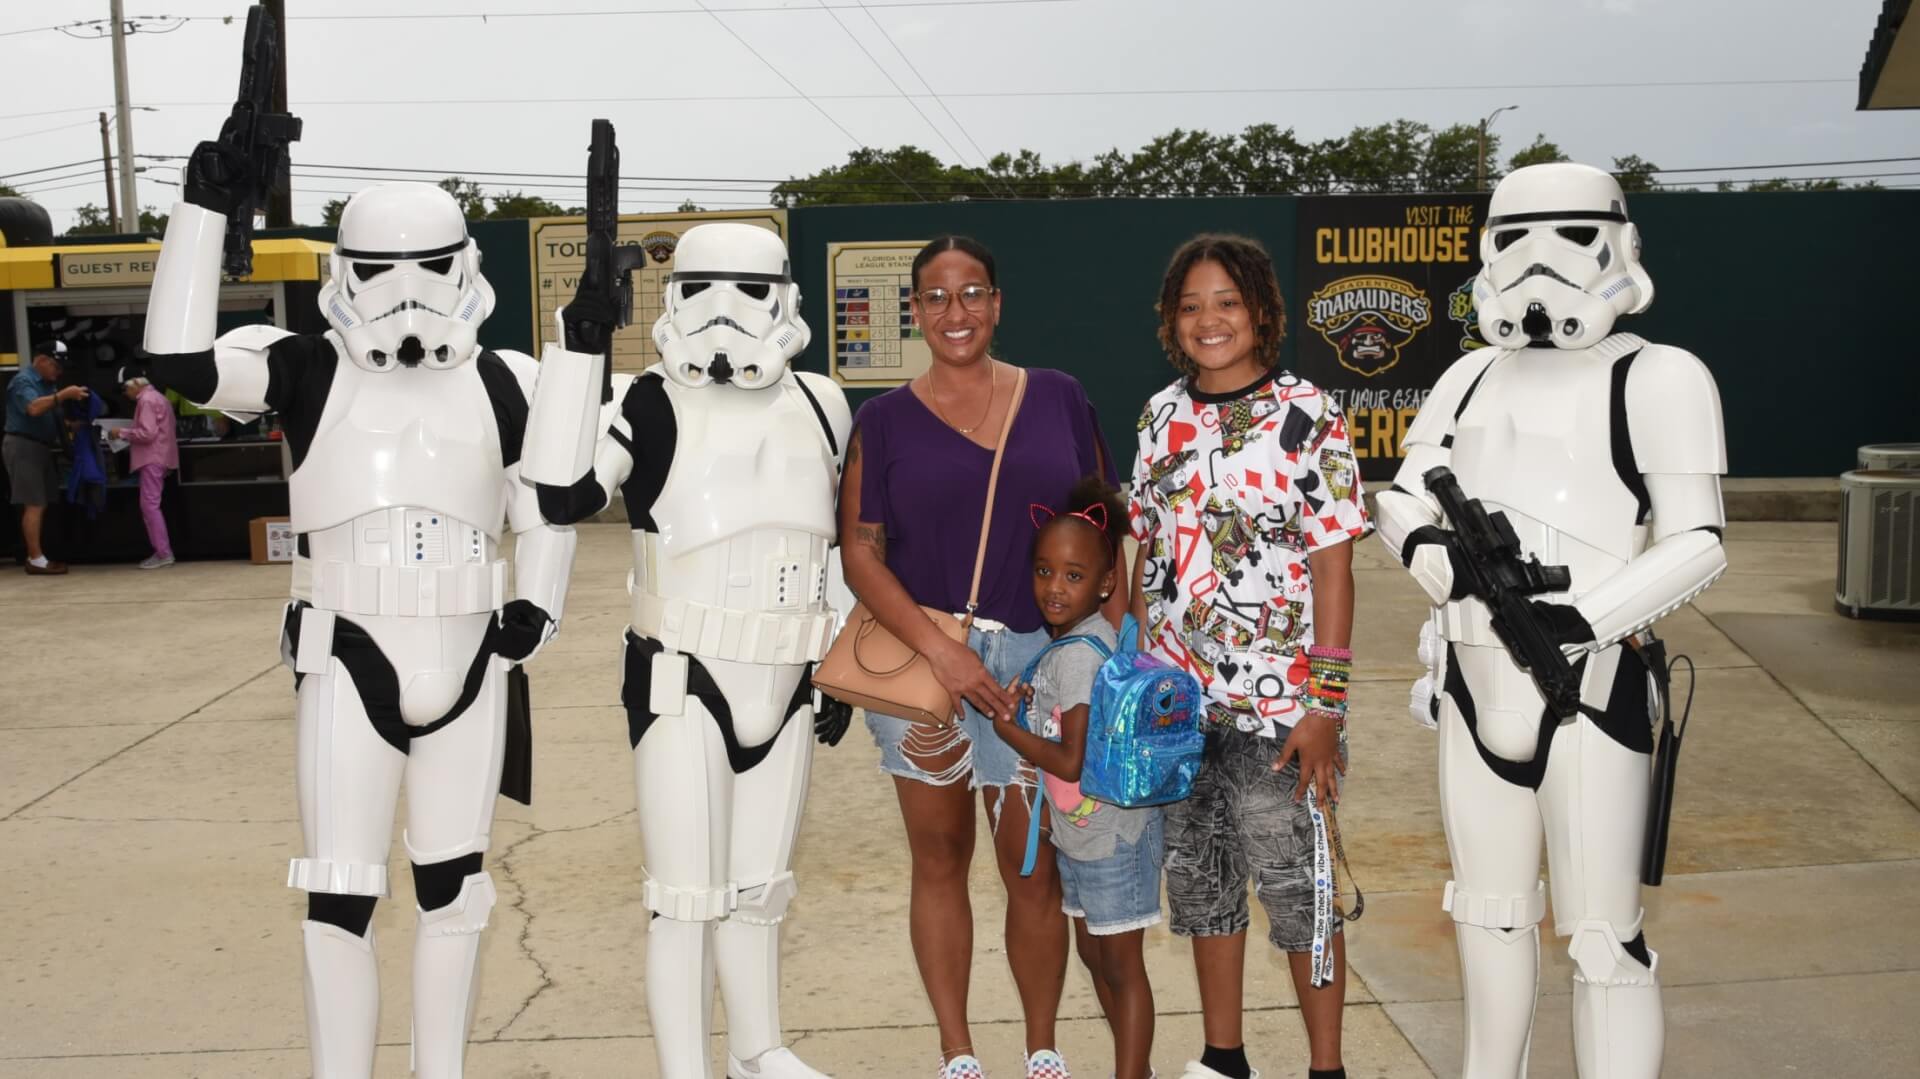 bradenton marauders fans posing with Star Wars storm troopers at LECOM Park